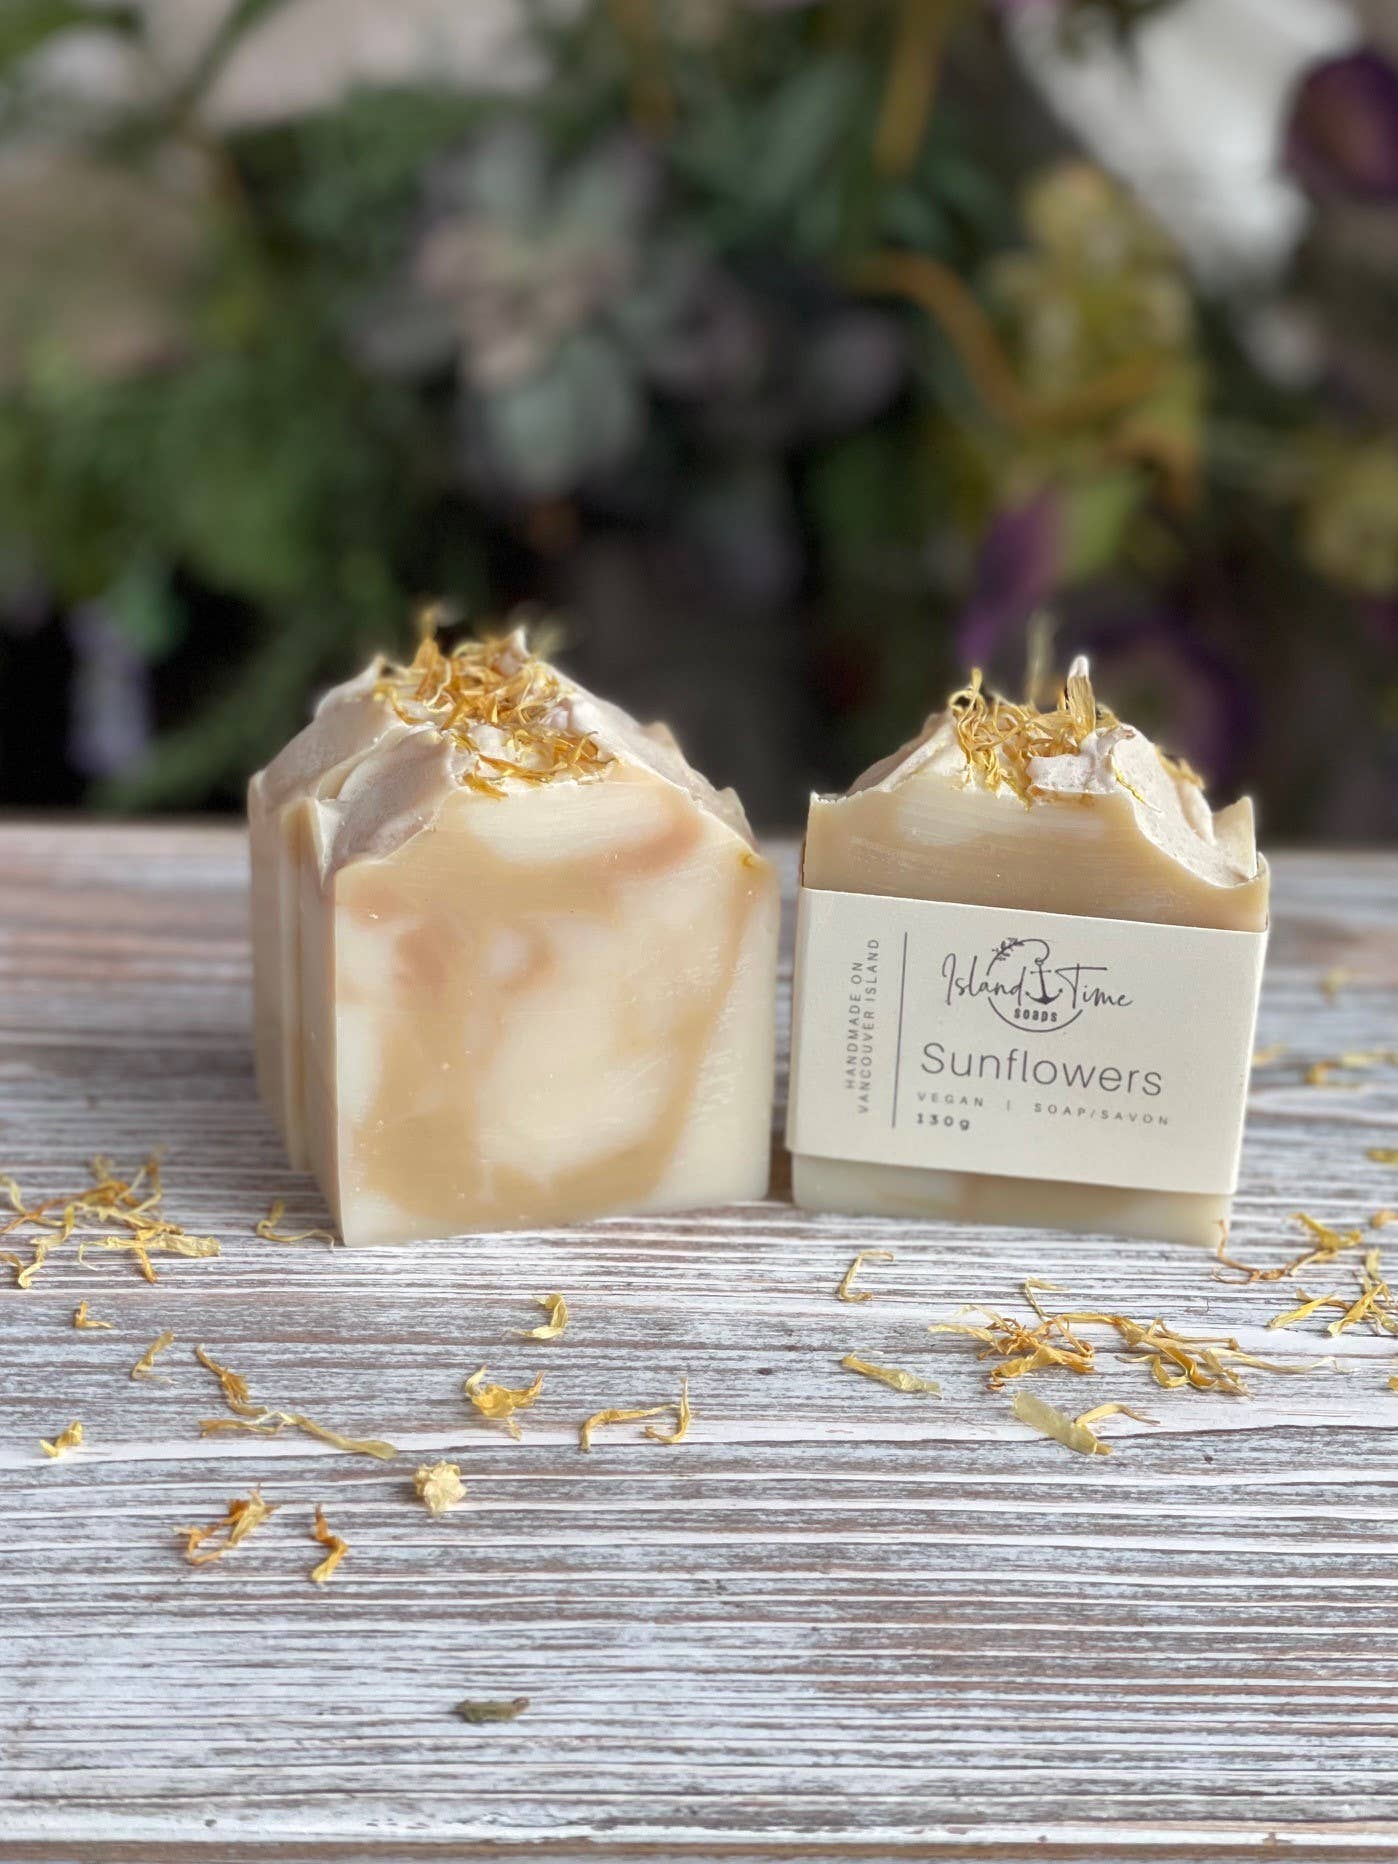 Island Time Soap + Candle - All Natural Sunflowers Handmade Artisan Soap